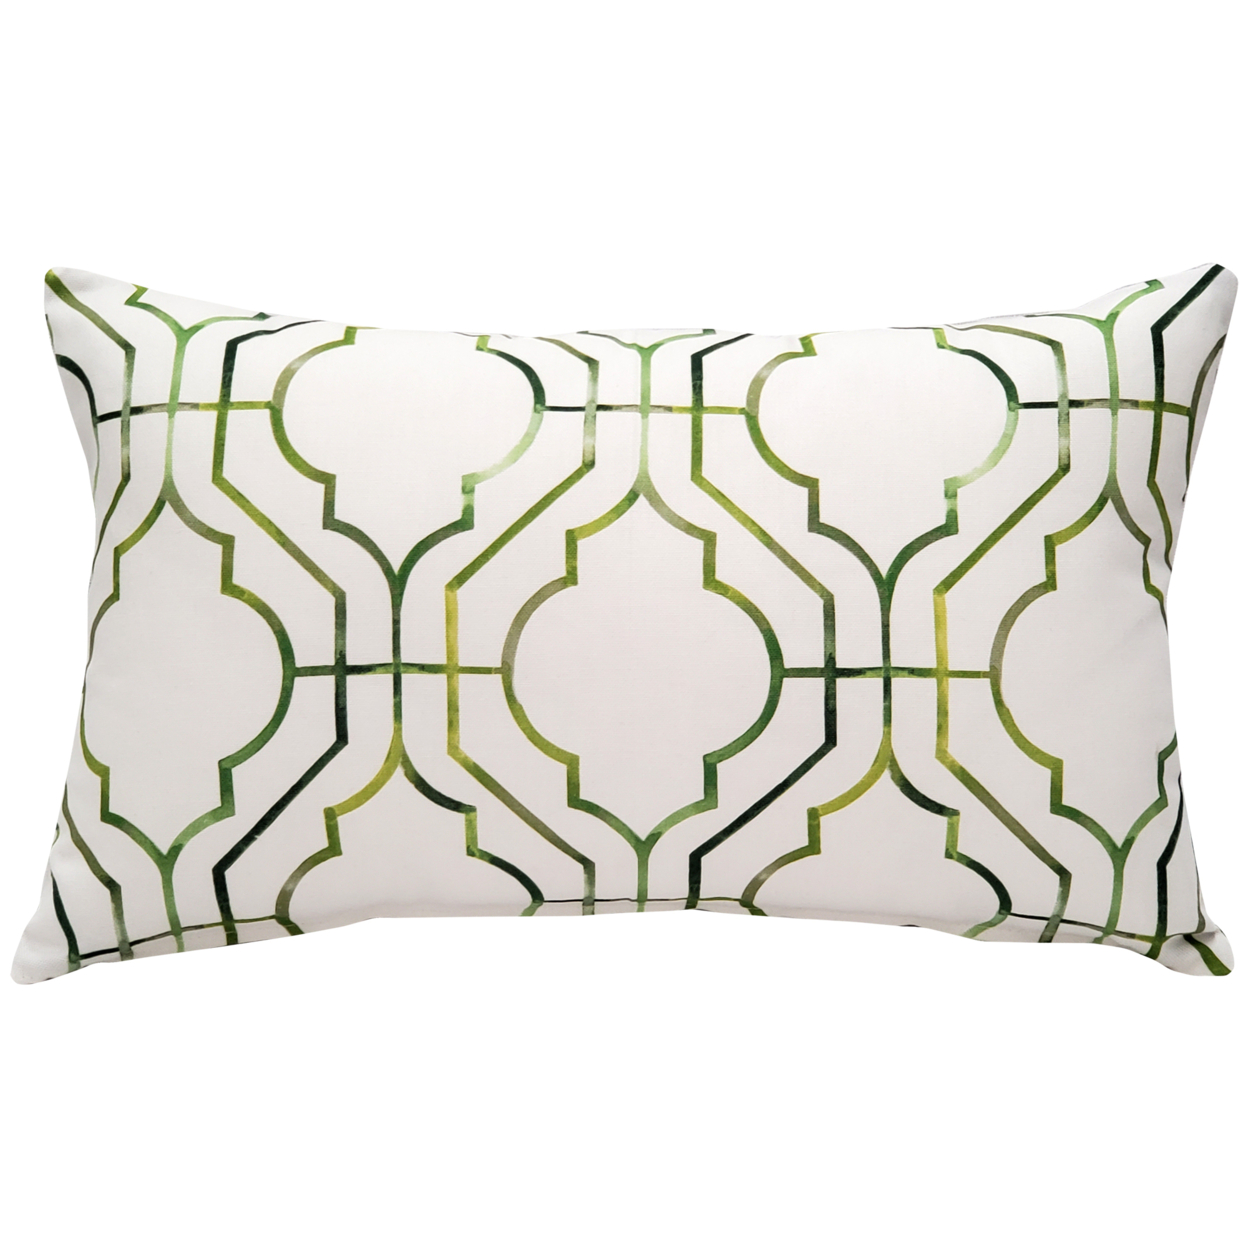 Biltmore Gate Green Throw Pillow 12x20 Inches Square, Complete Pillow With Polyfill Pillow Insert